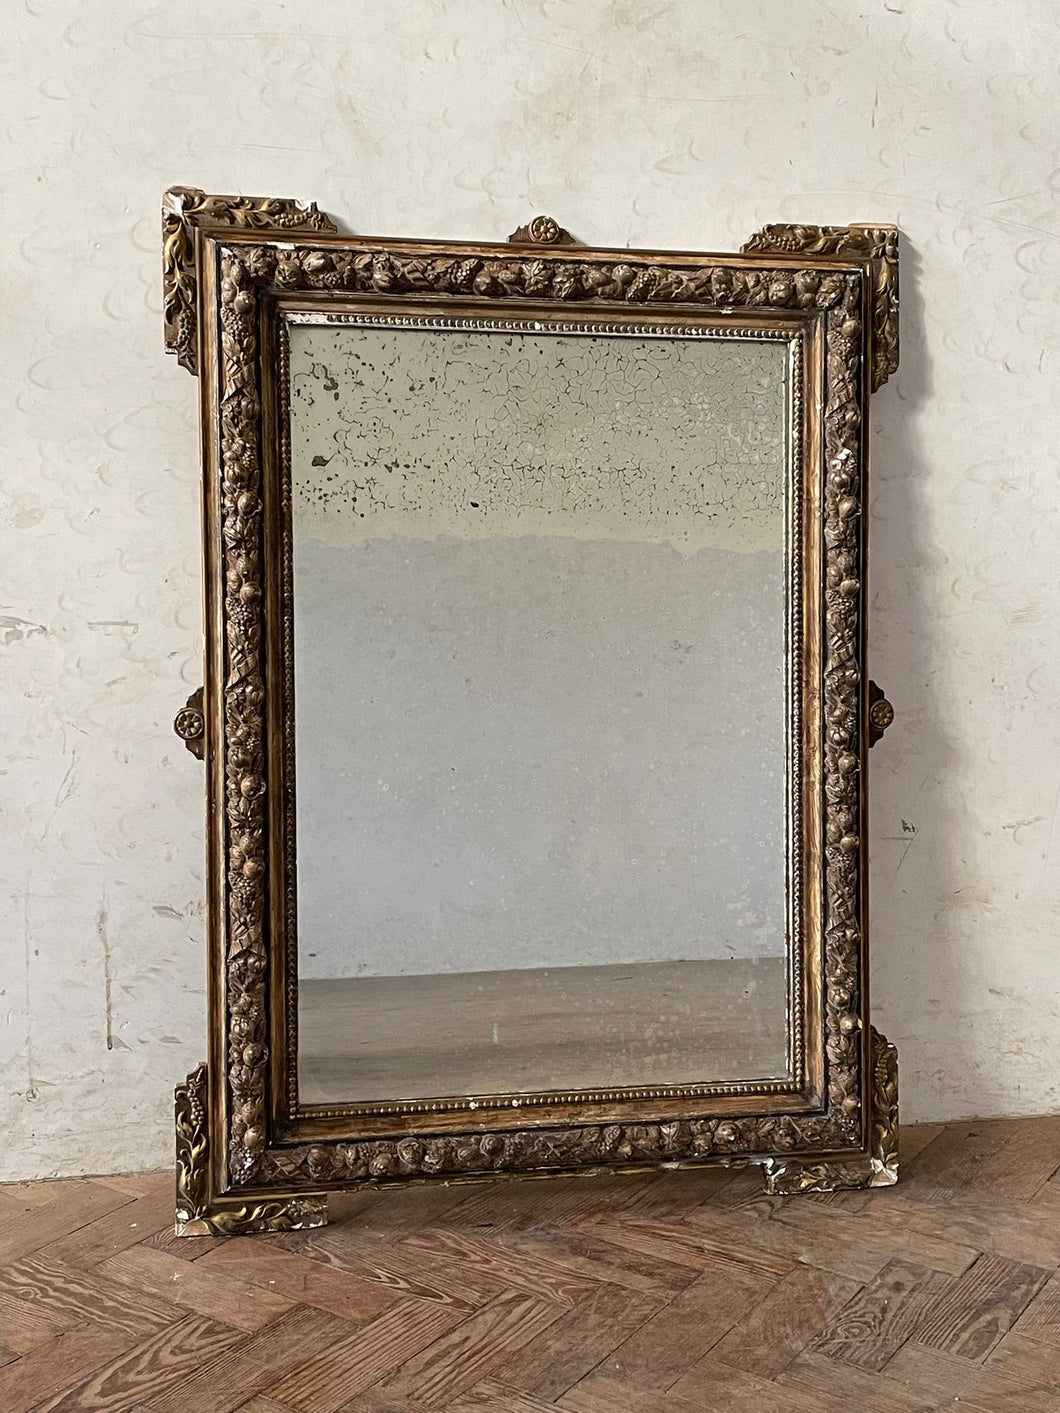 Early 1900s French Mirror